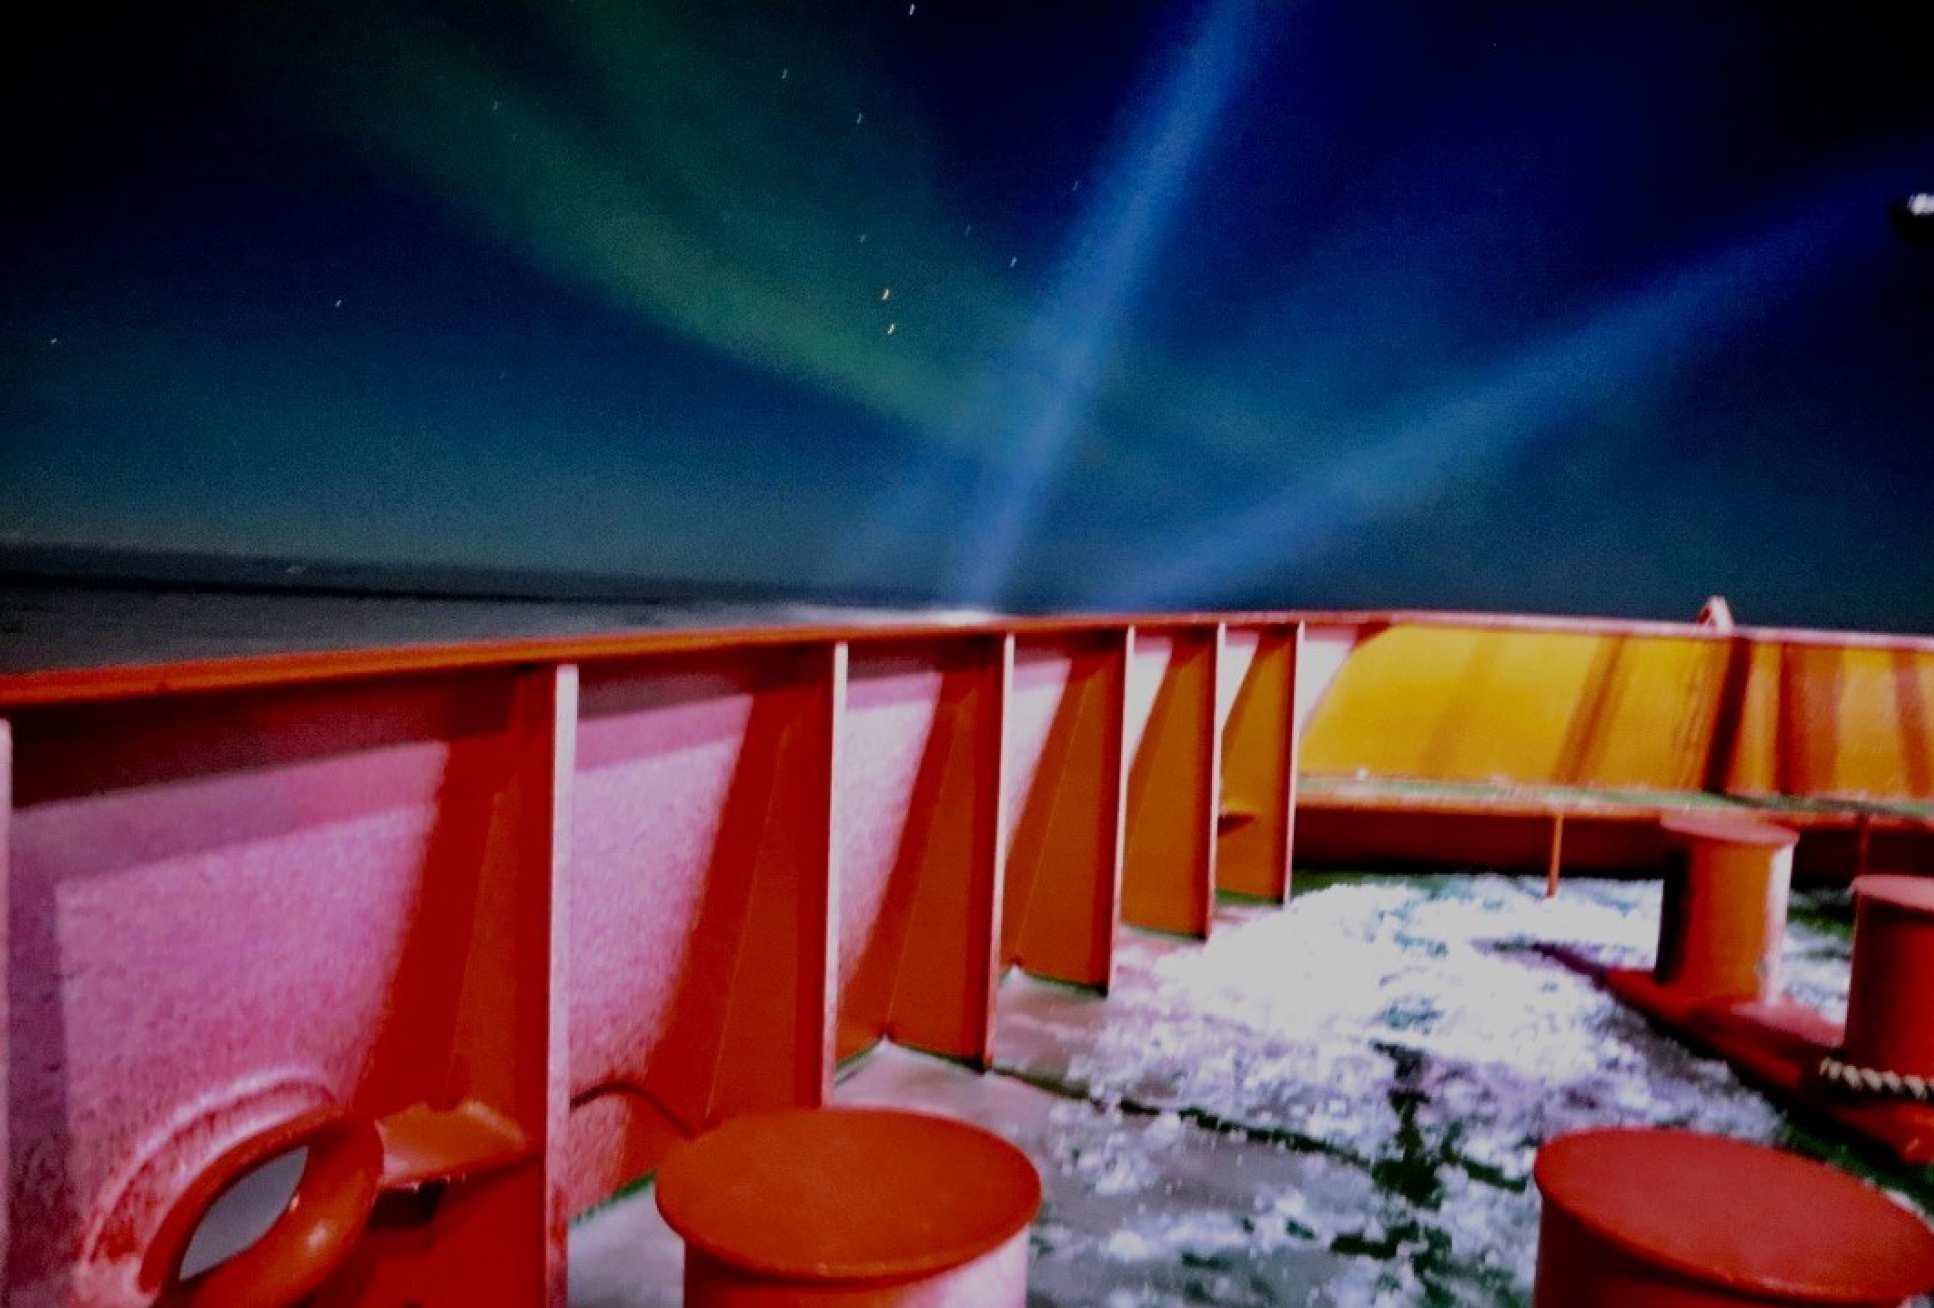 Hull of a boat, showing northern lights in the distance